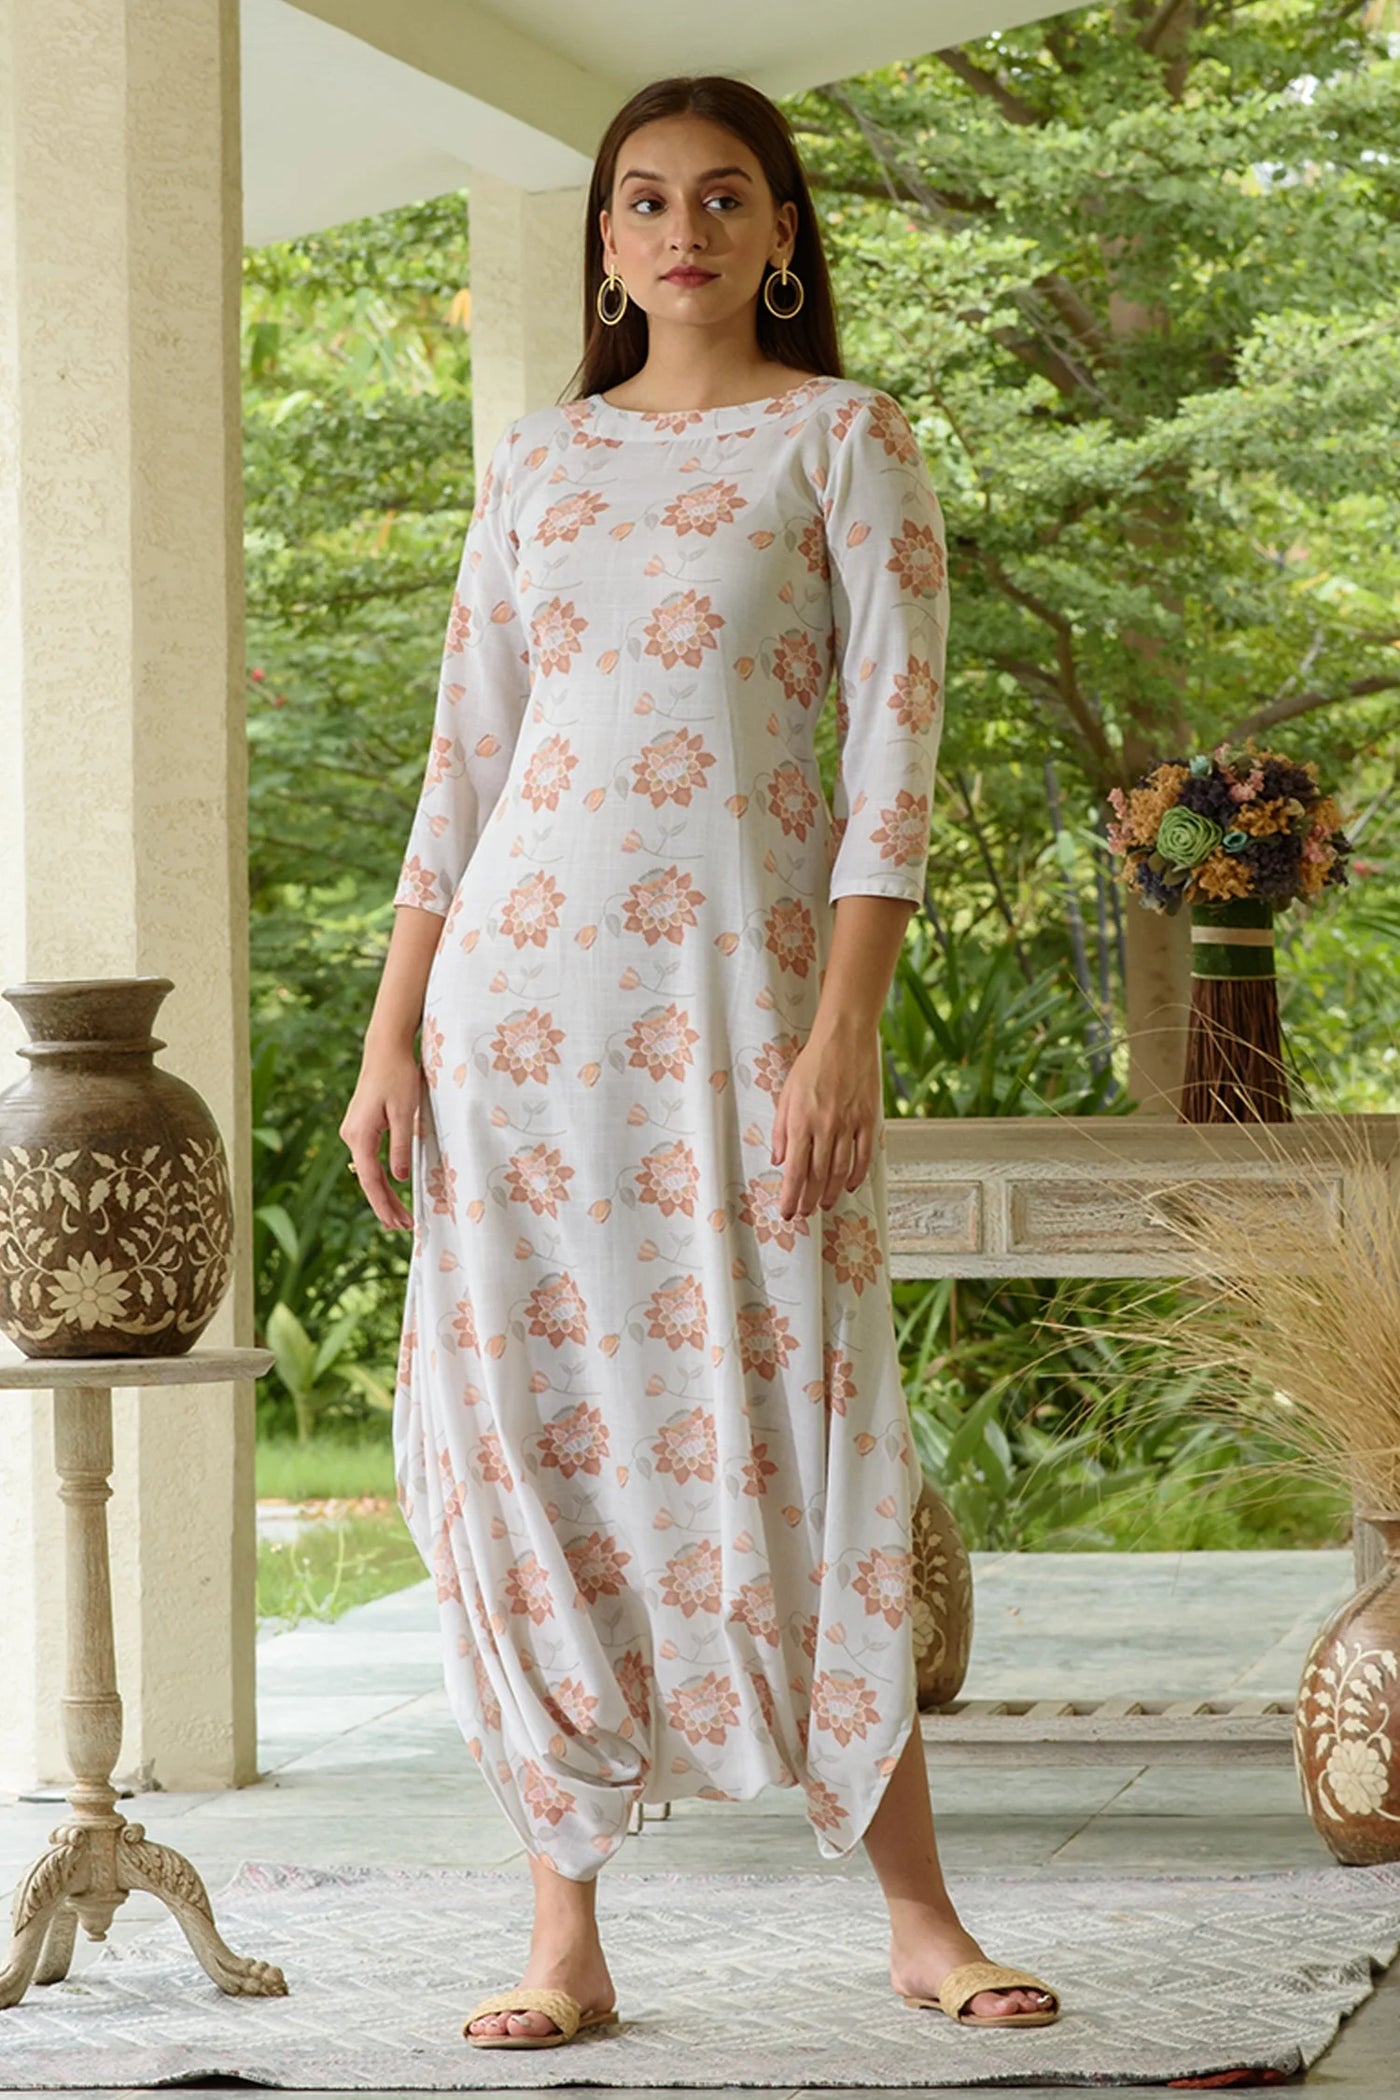 Linen Floral Printed Dhoti Jumpsuit - Indian Clothing in Denver, CO, Aurora, CO, Boulder, CO, Fort Collins, CO, Colorado Springs, CO, Parker, CO, Highlands Ranch, CO, Cherry Creek, CO, Centennial, CO, and Longmont, CO. Nationwide shipping USA - India Fashion X